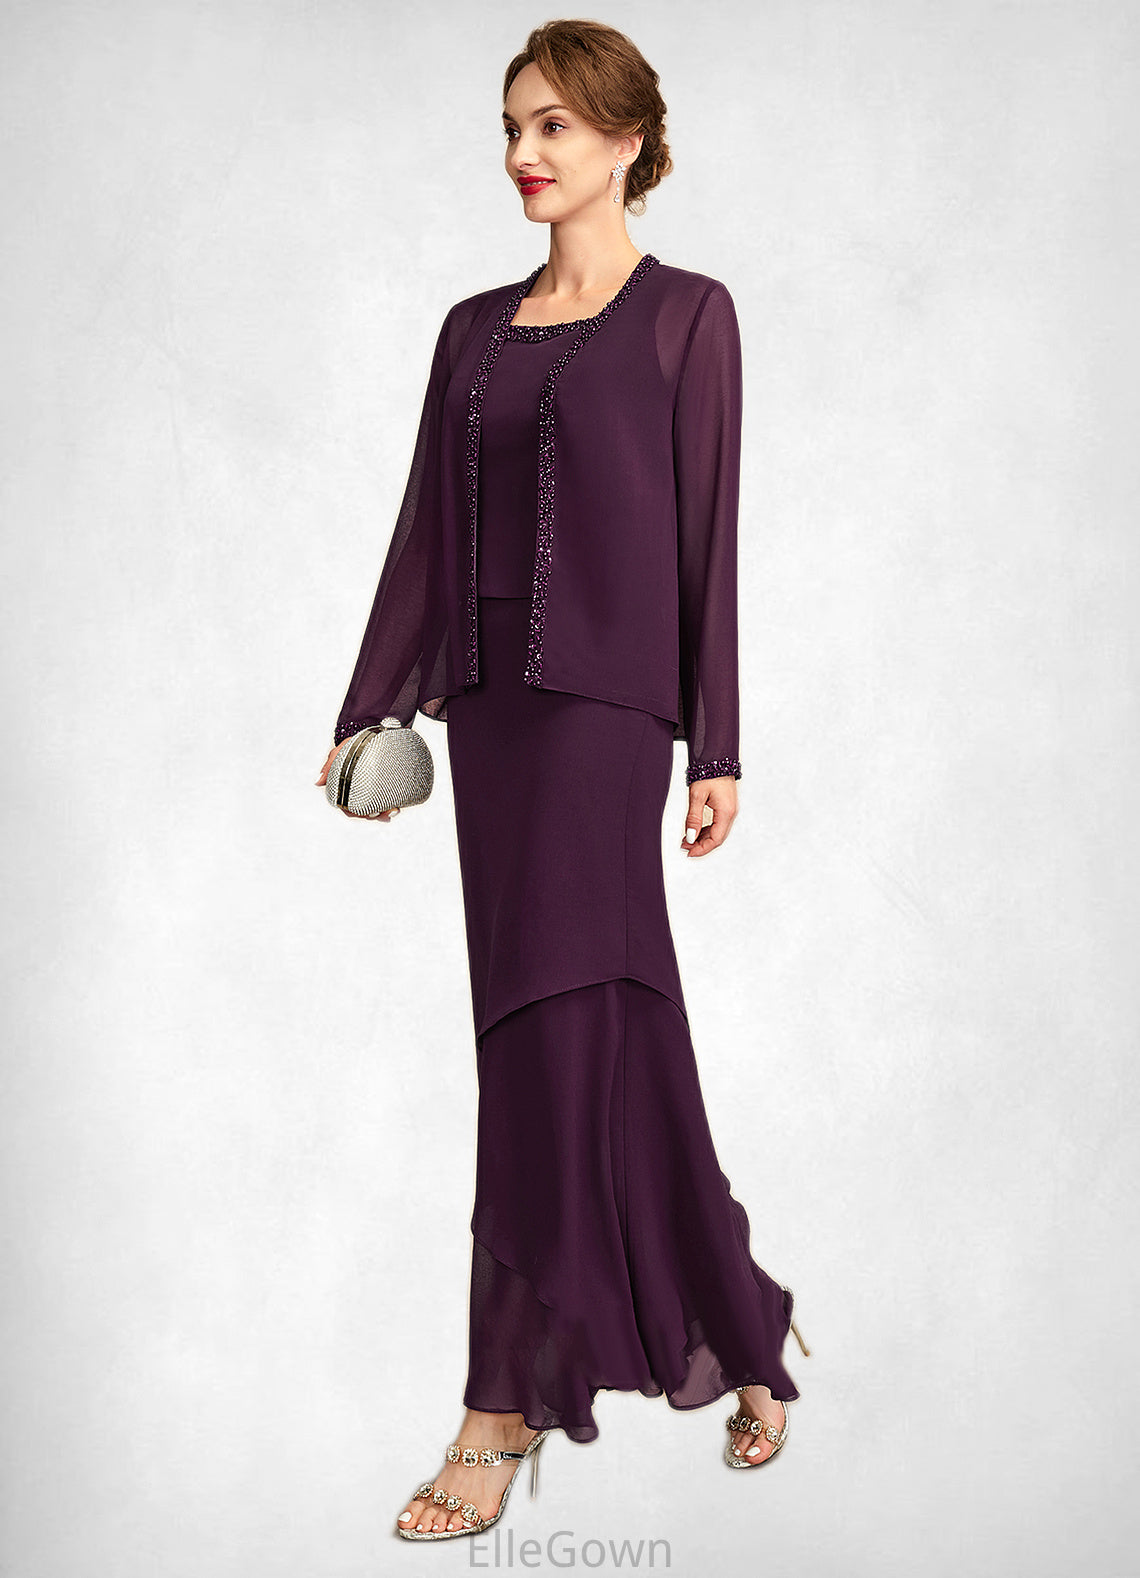 Madeleine Sheath/Column Scoop Neck Ankle-Length Chiffon Mother of the Bride Dress With Beading Sequins DE126P0015024